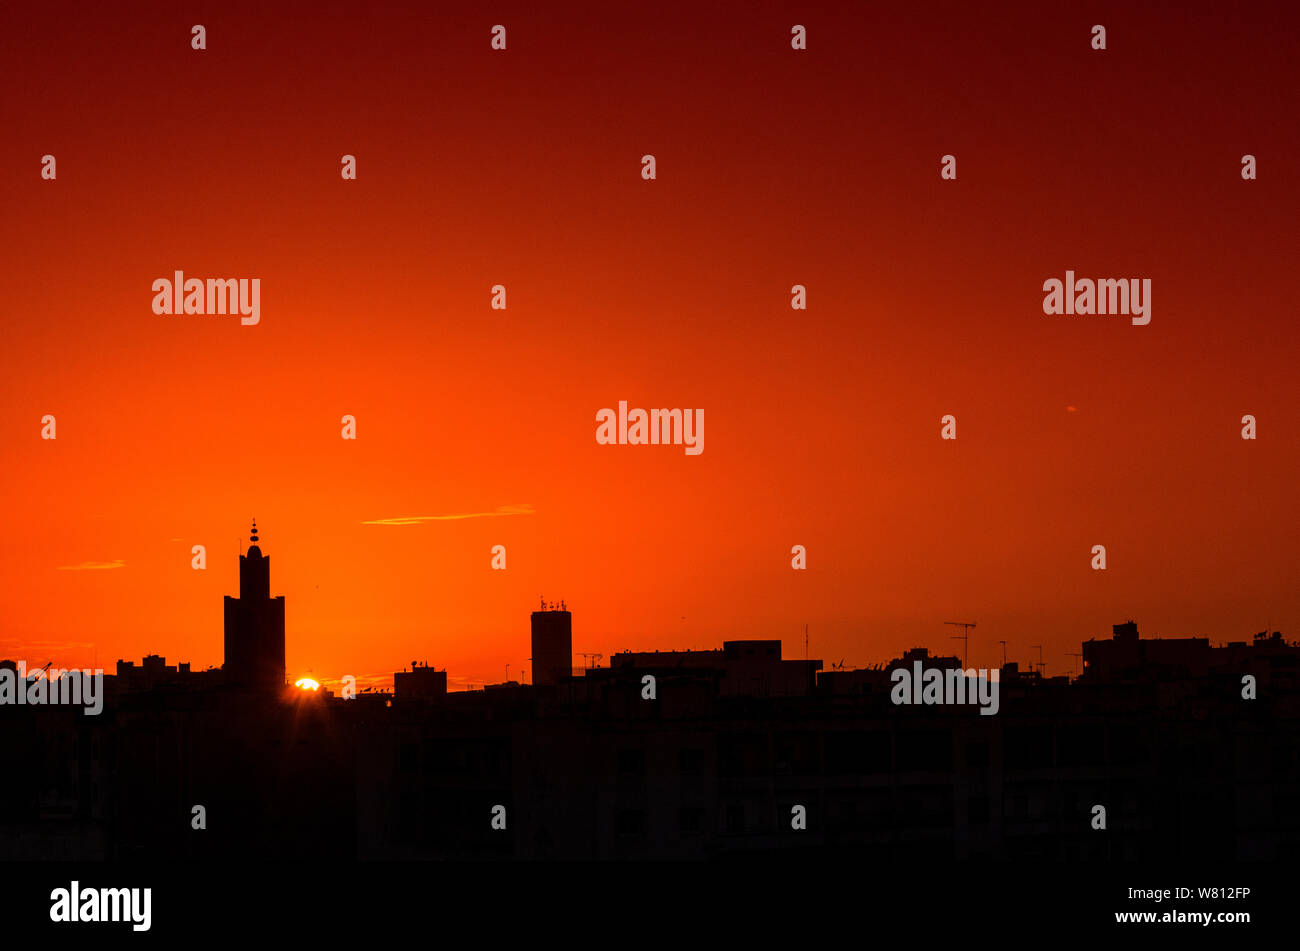 Sunset over the city, a mosque and buildings in silhouette on a background of orange sky. Stock Photo